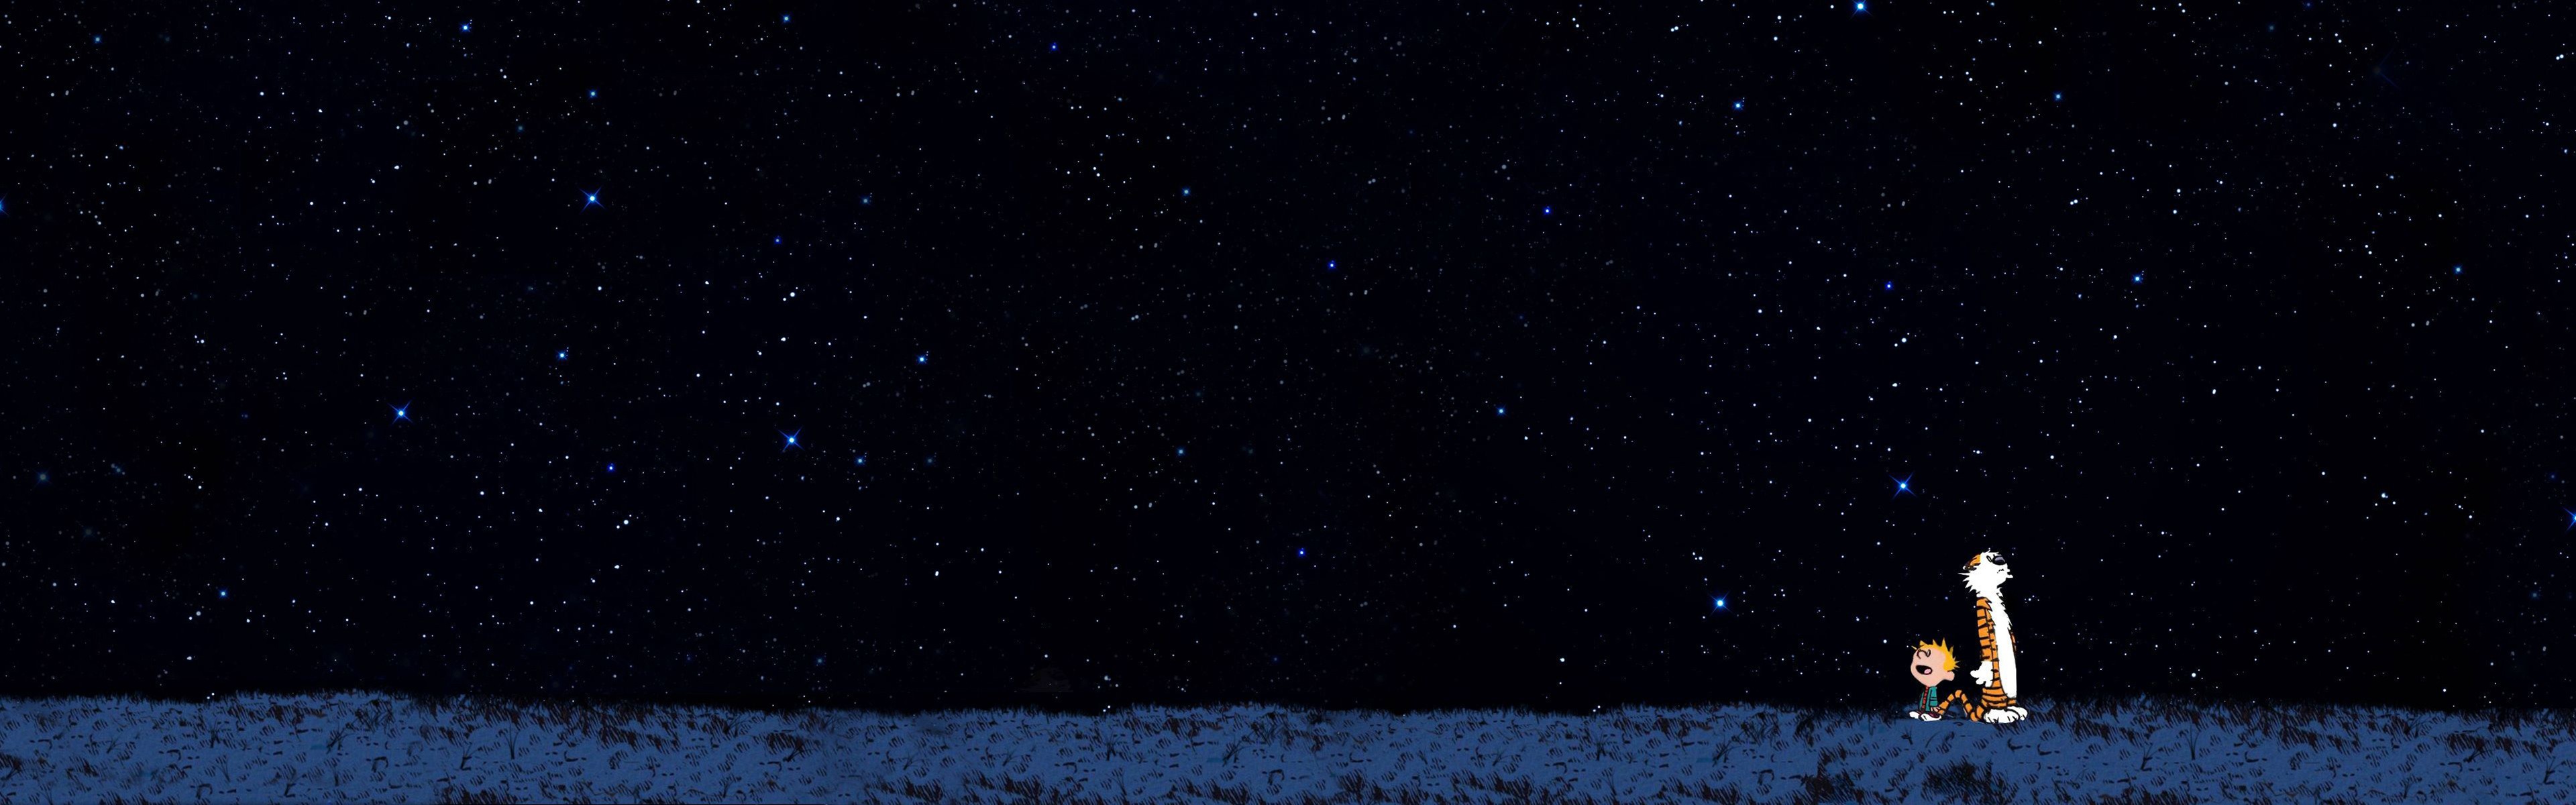 Calvin And Hobbes Stars Starry Night Simple Background Multiple Display Dual Monitors 3840x1200